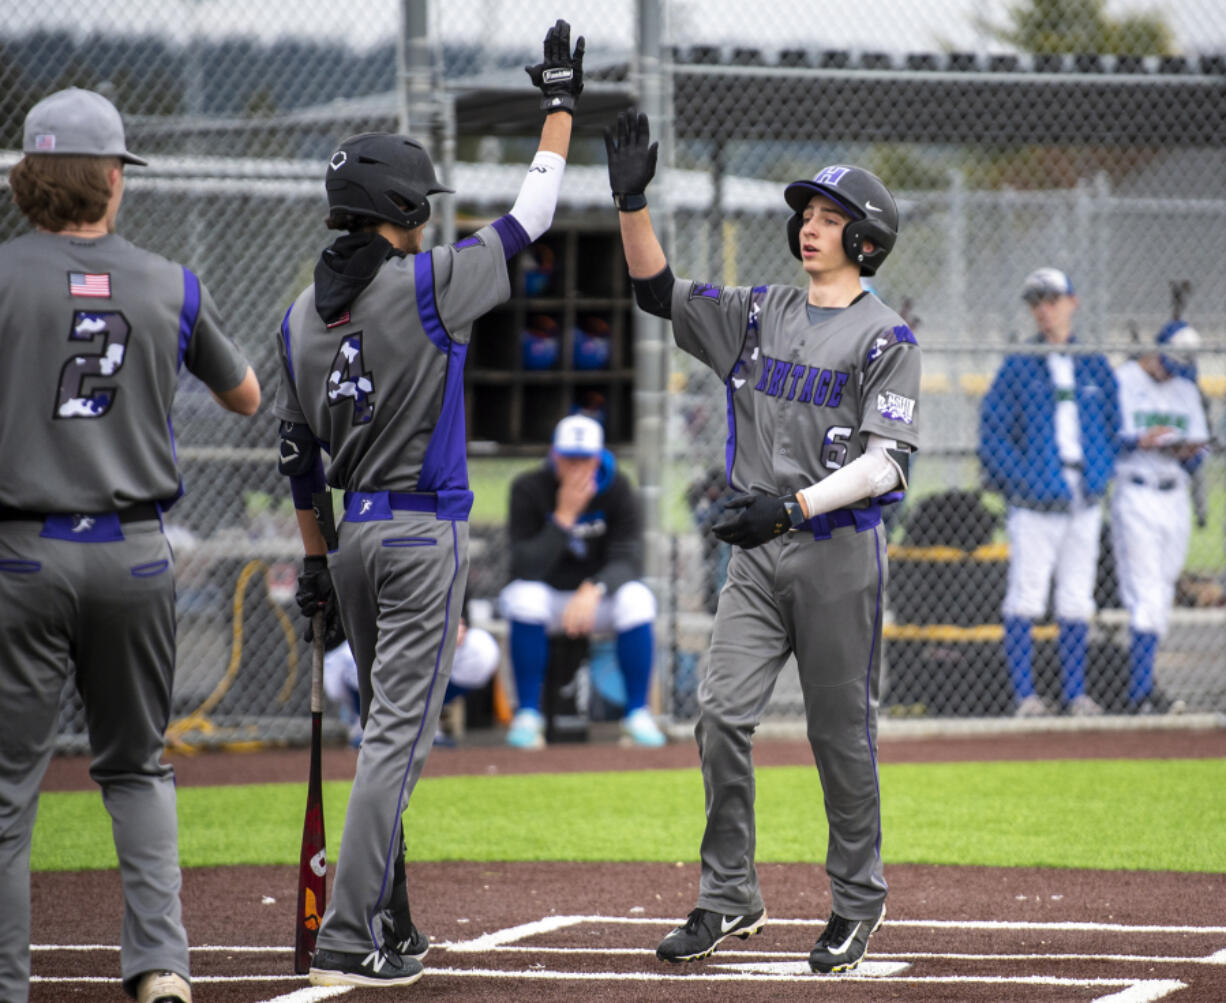 Heritage's Daniel Kehler, right, celebrates with teammates after a solo home run Wednesday, April 27, 2022, during the Timberwolves' 7-1 loss to Mountain View at Union High School.